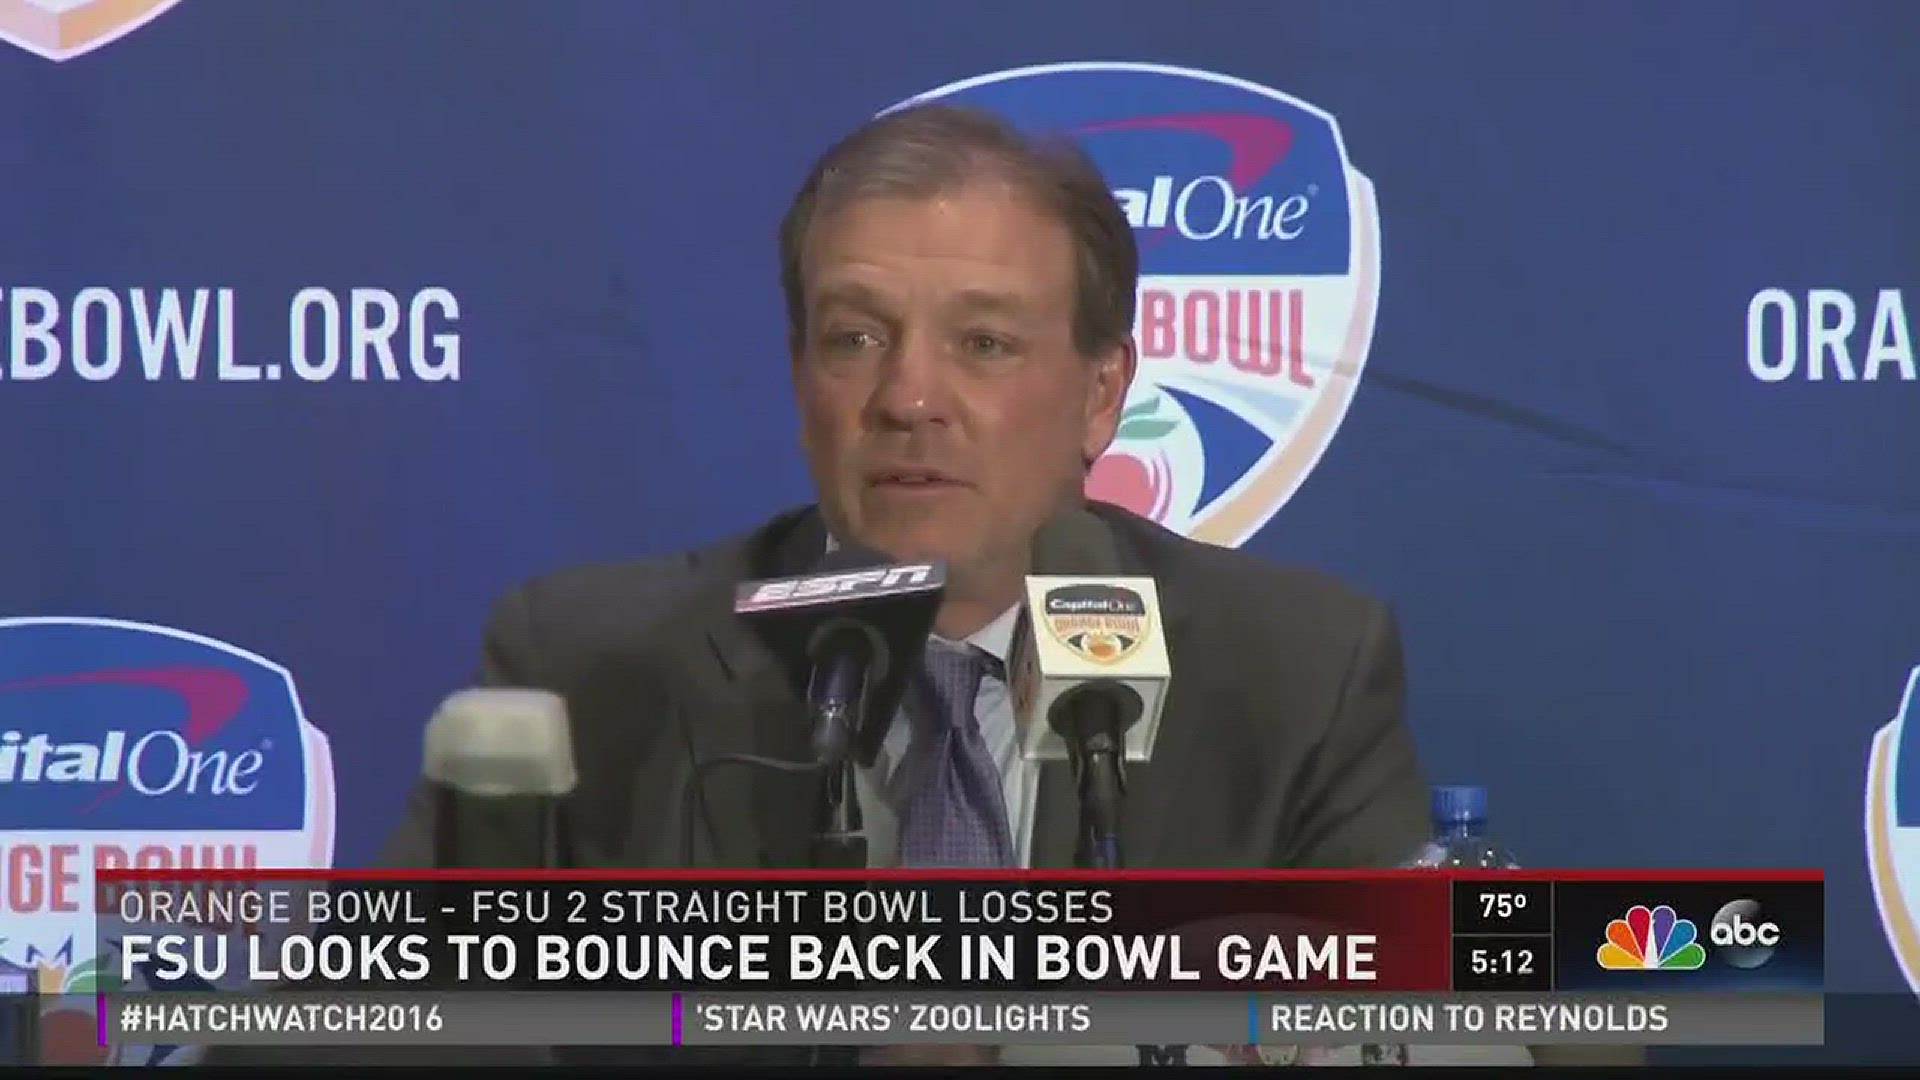 FSU looks to bounce back in bowl game